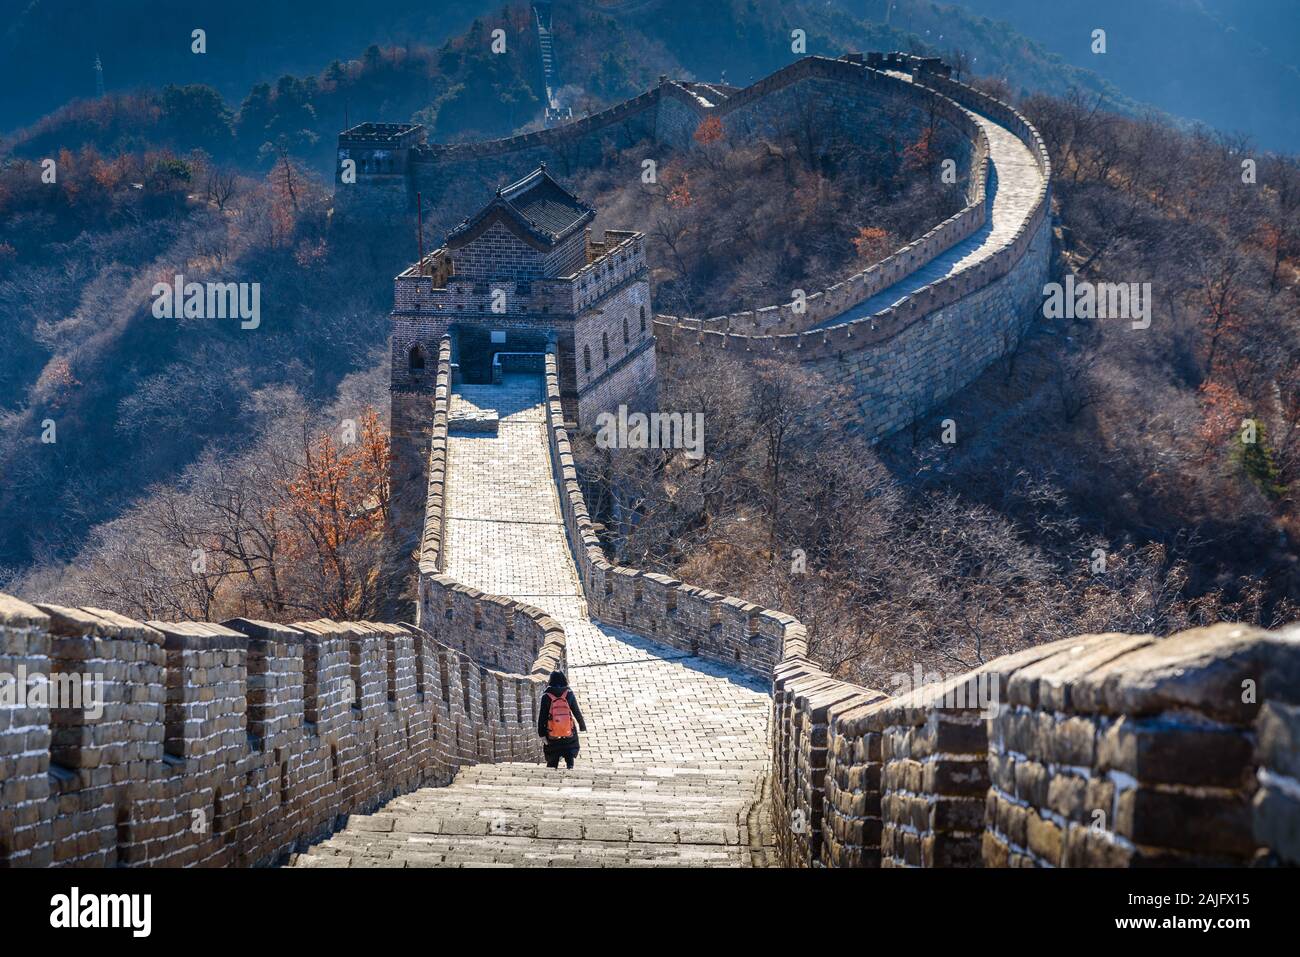 Panoramic view of Great Wall of China in winter, Mutianyu Section, defensive tower Stock Photo